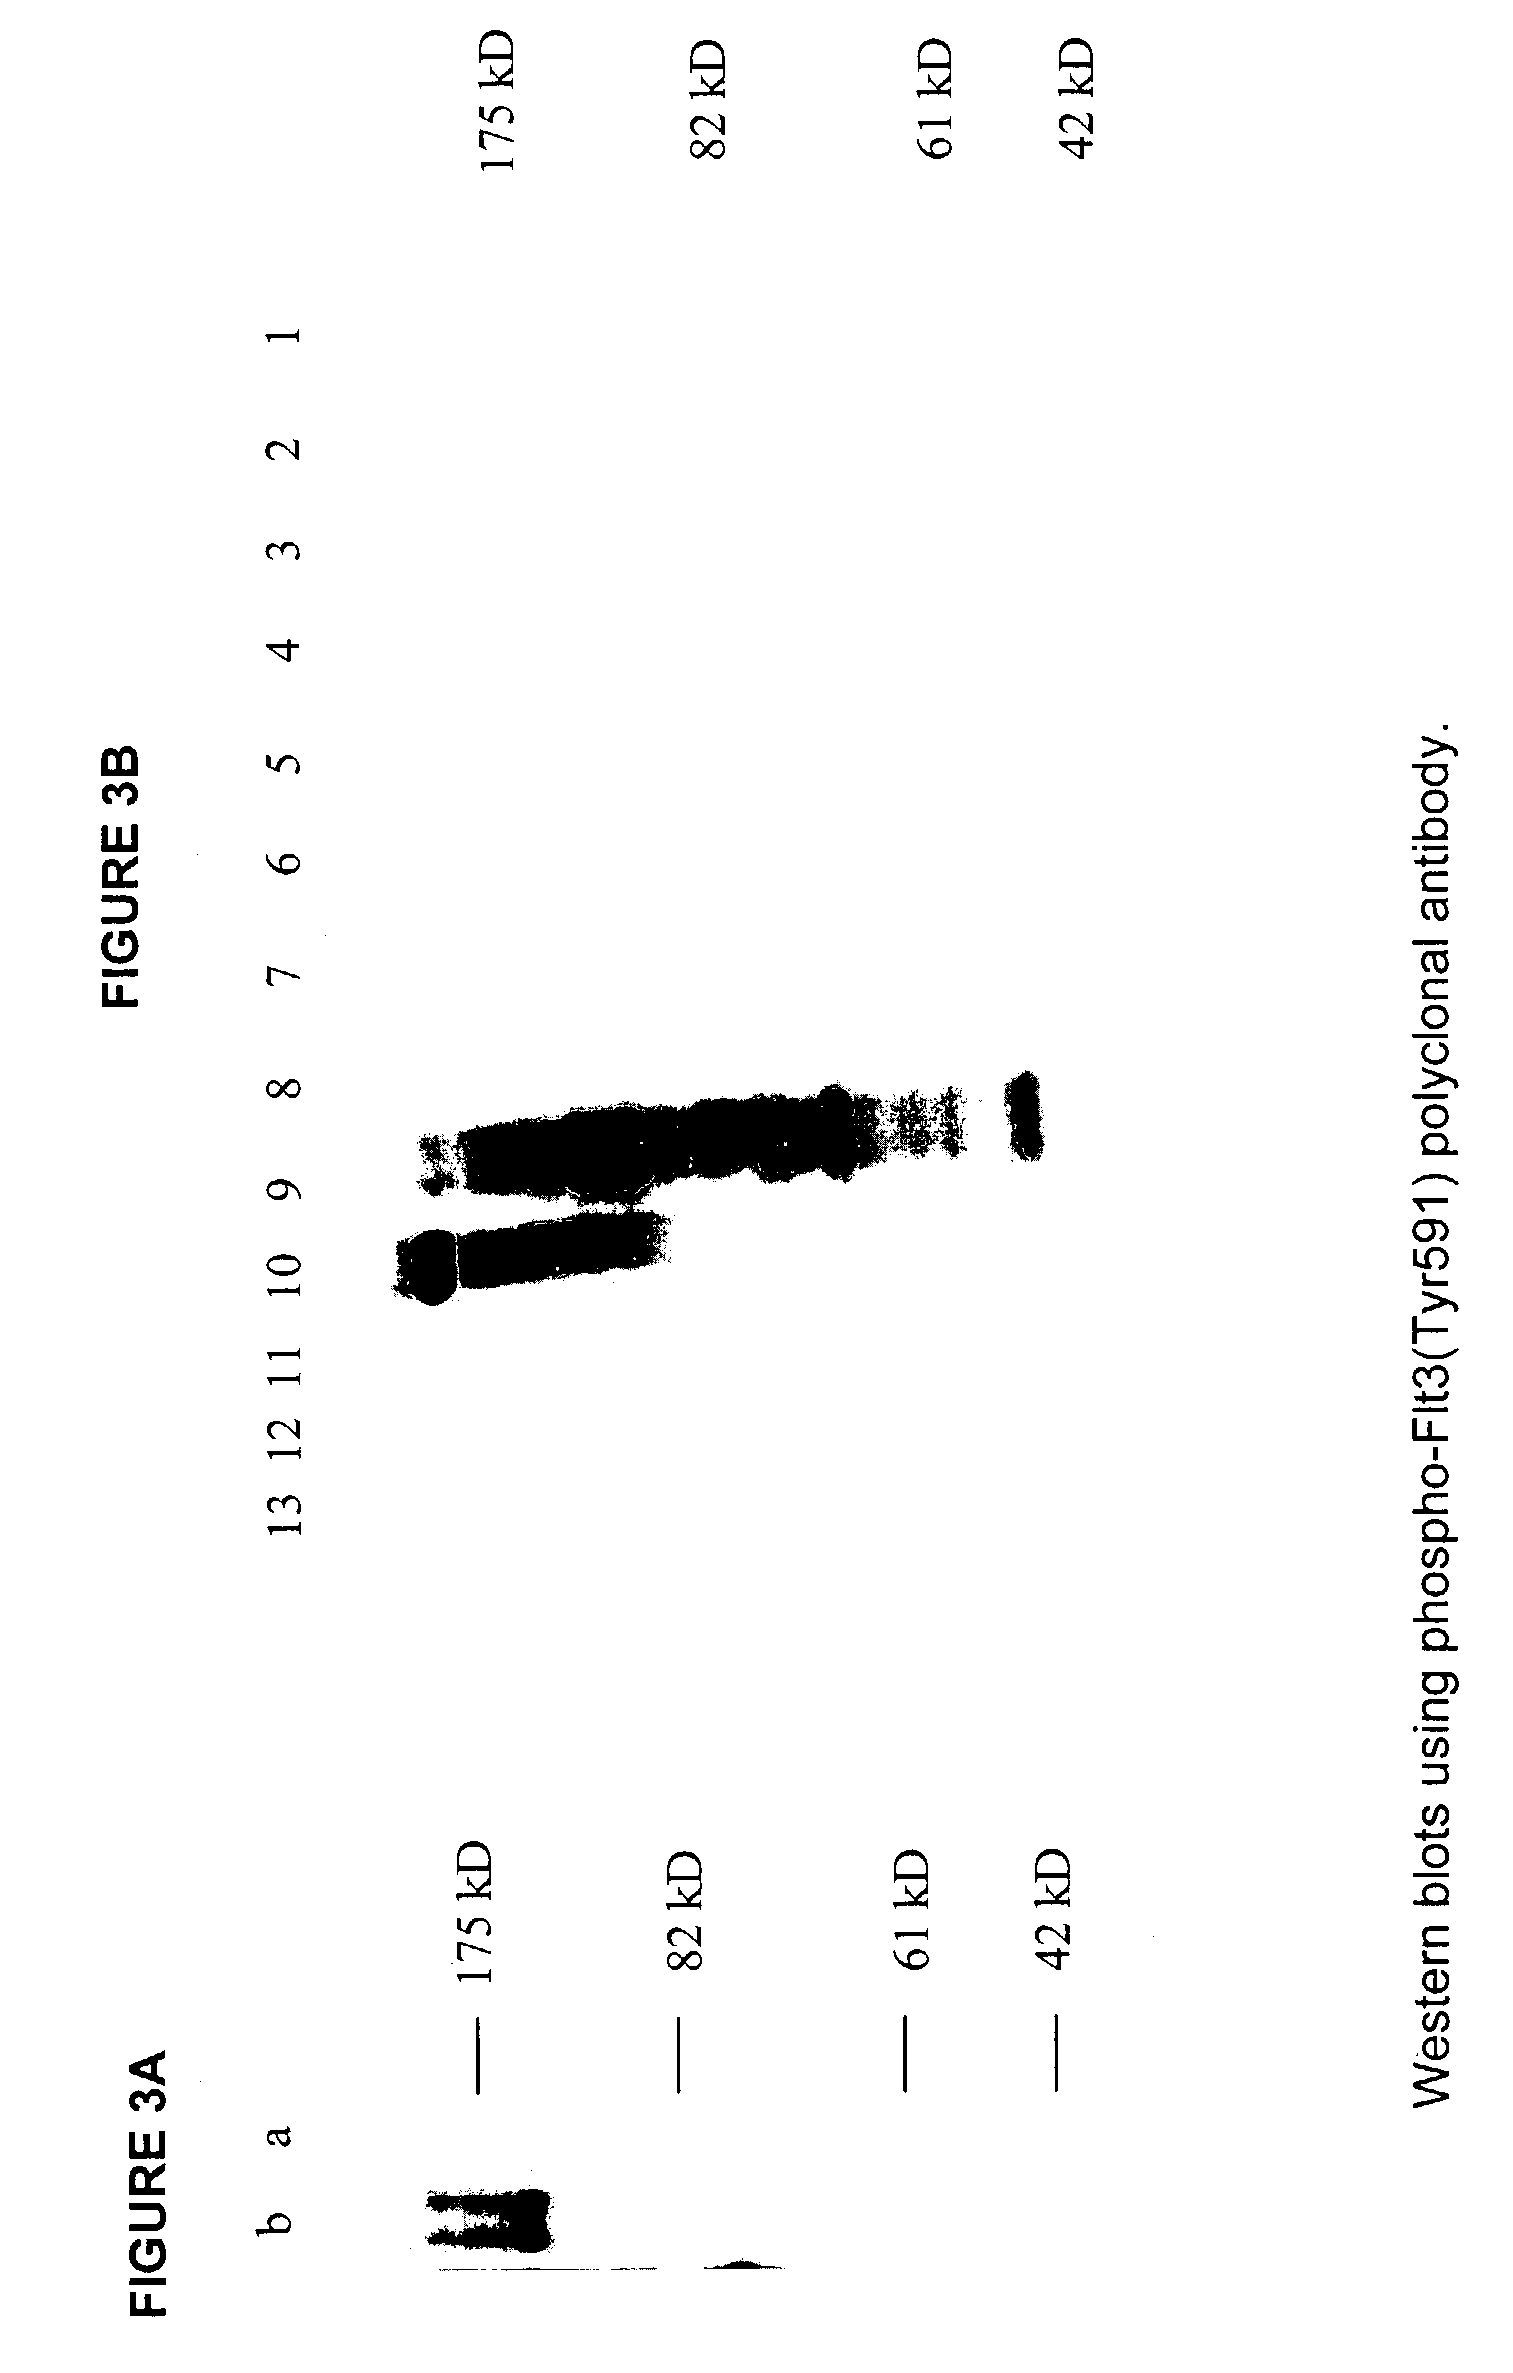 Phospho-specific antibodies to Flt3 and uses thereof